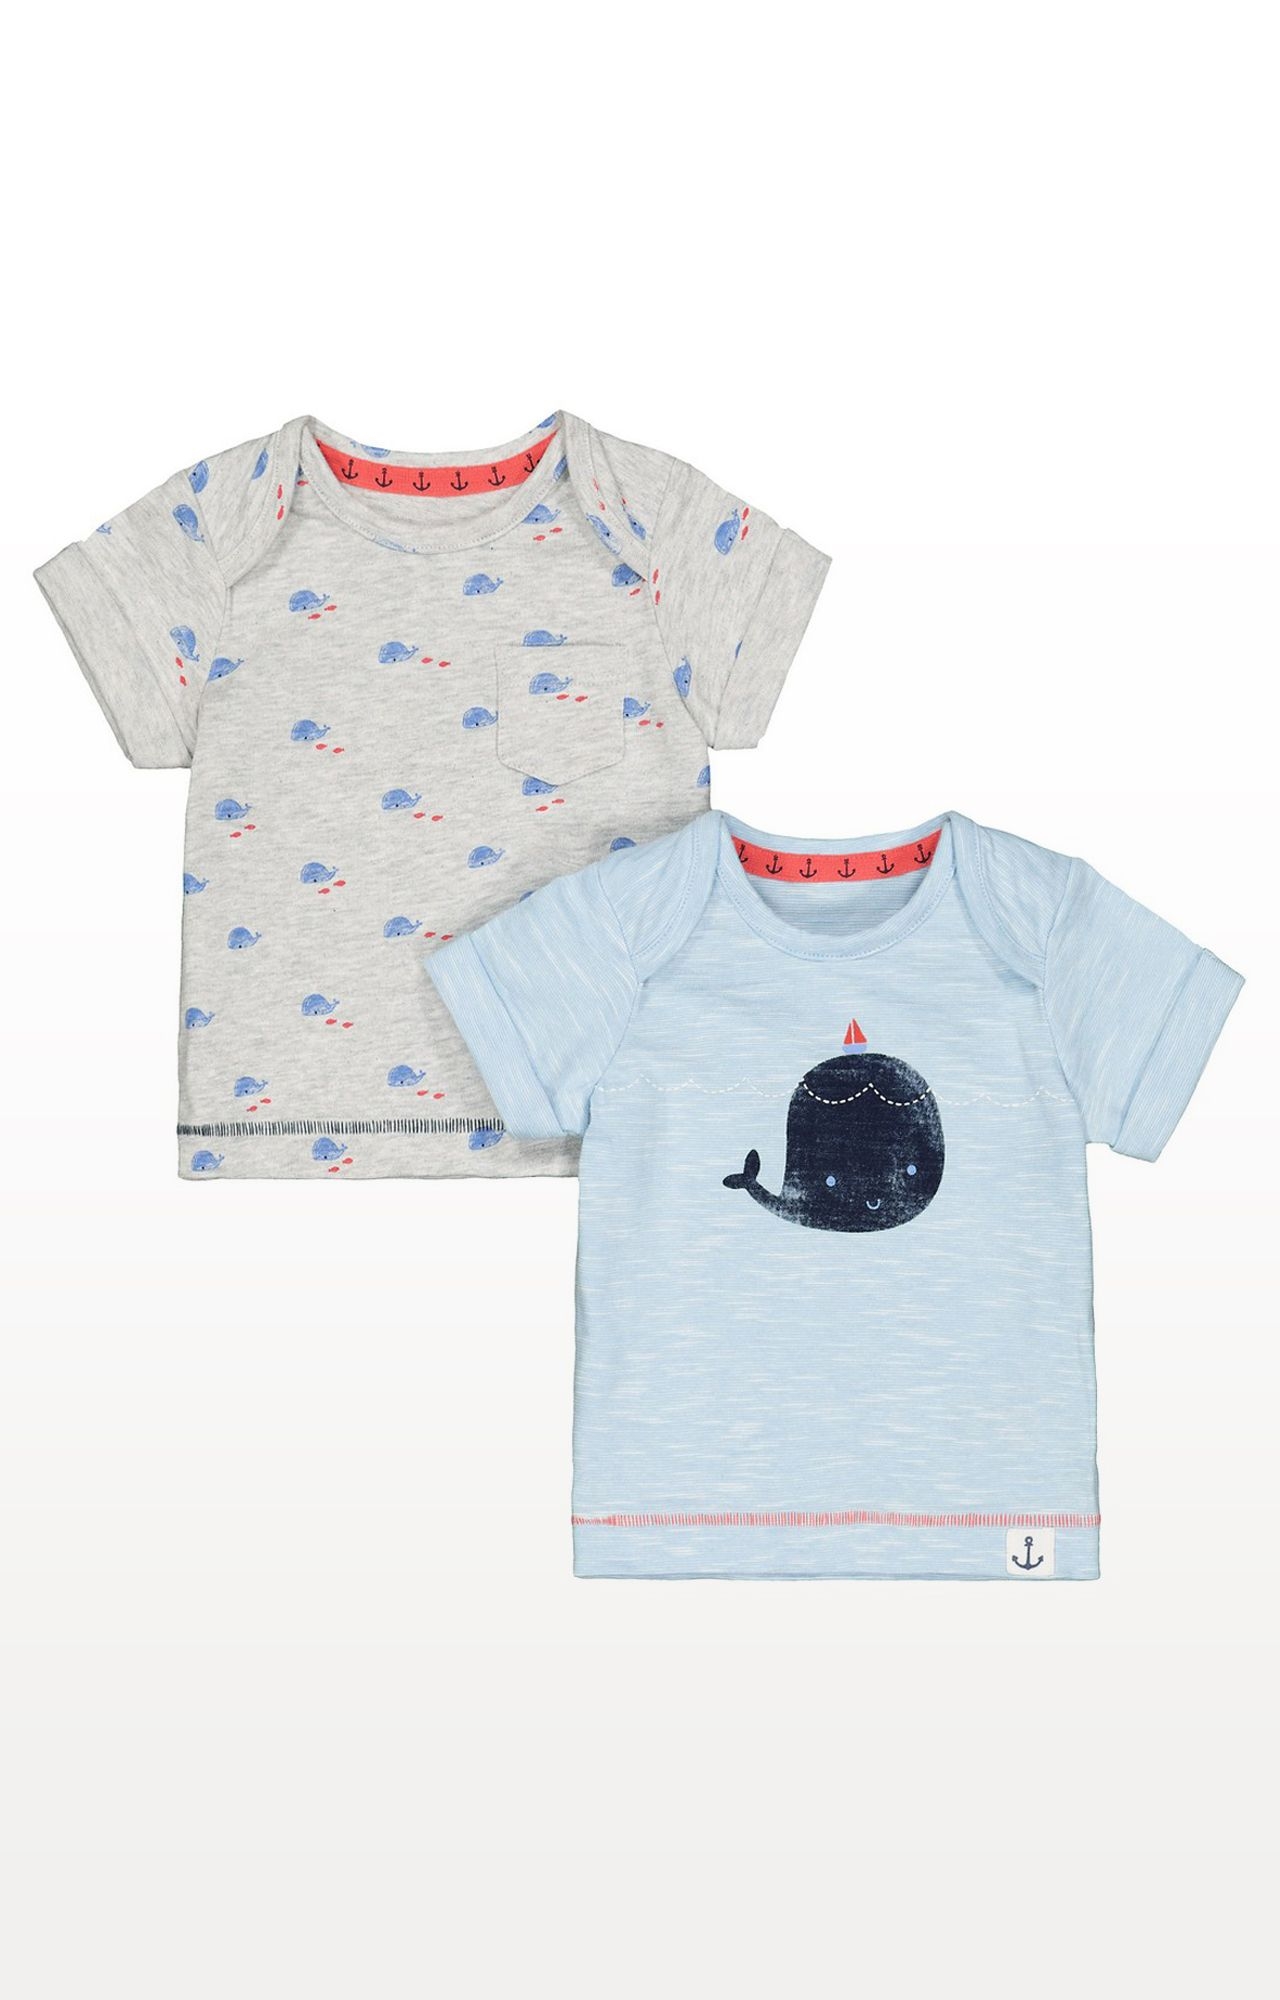 Mothercare | Blue and Grey Printed Whale T-Shirts - Pack of 2